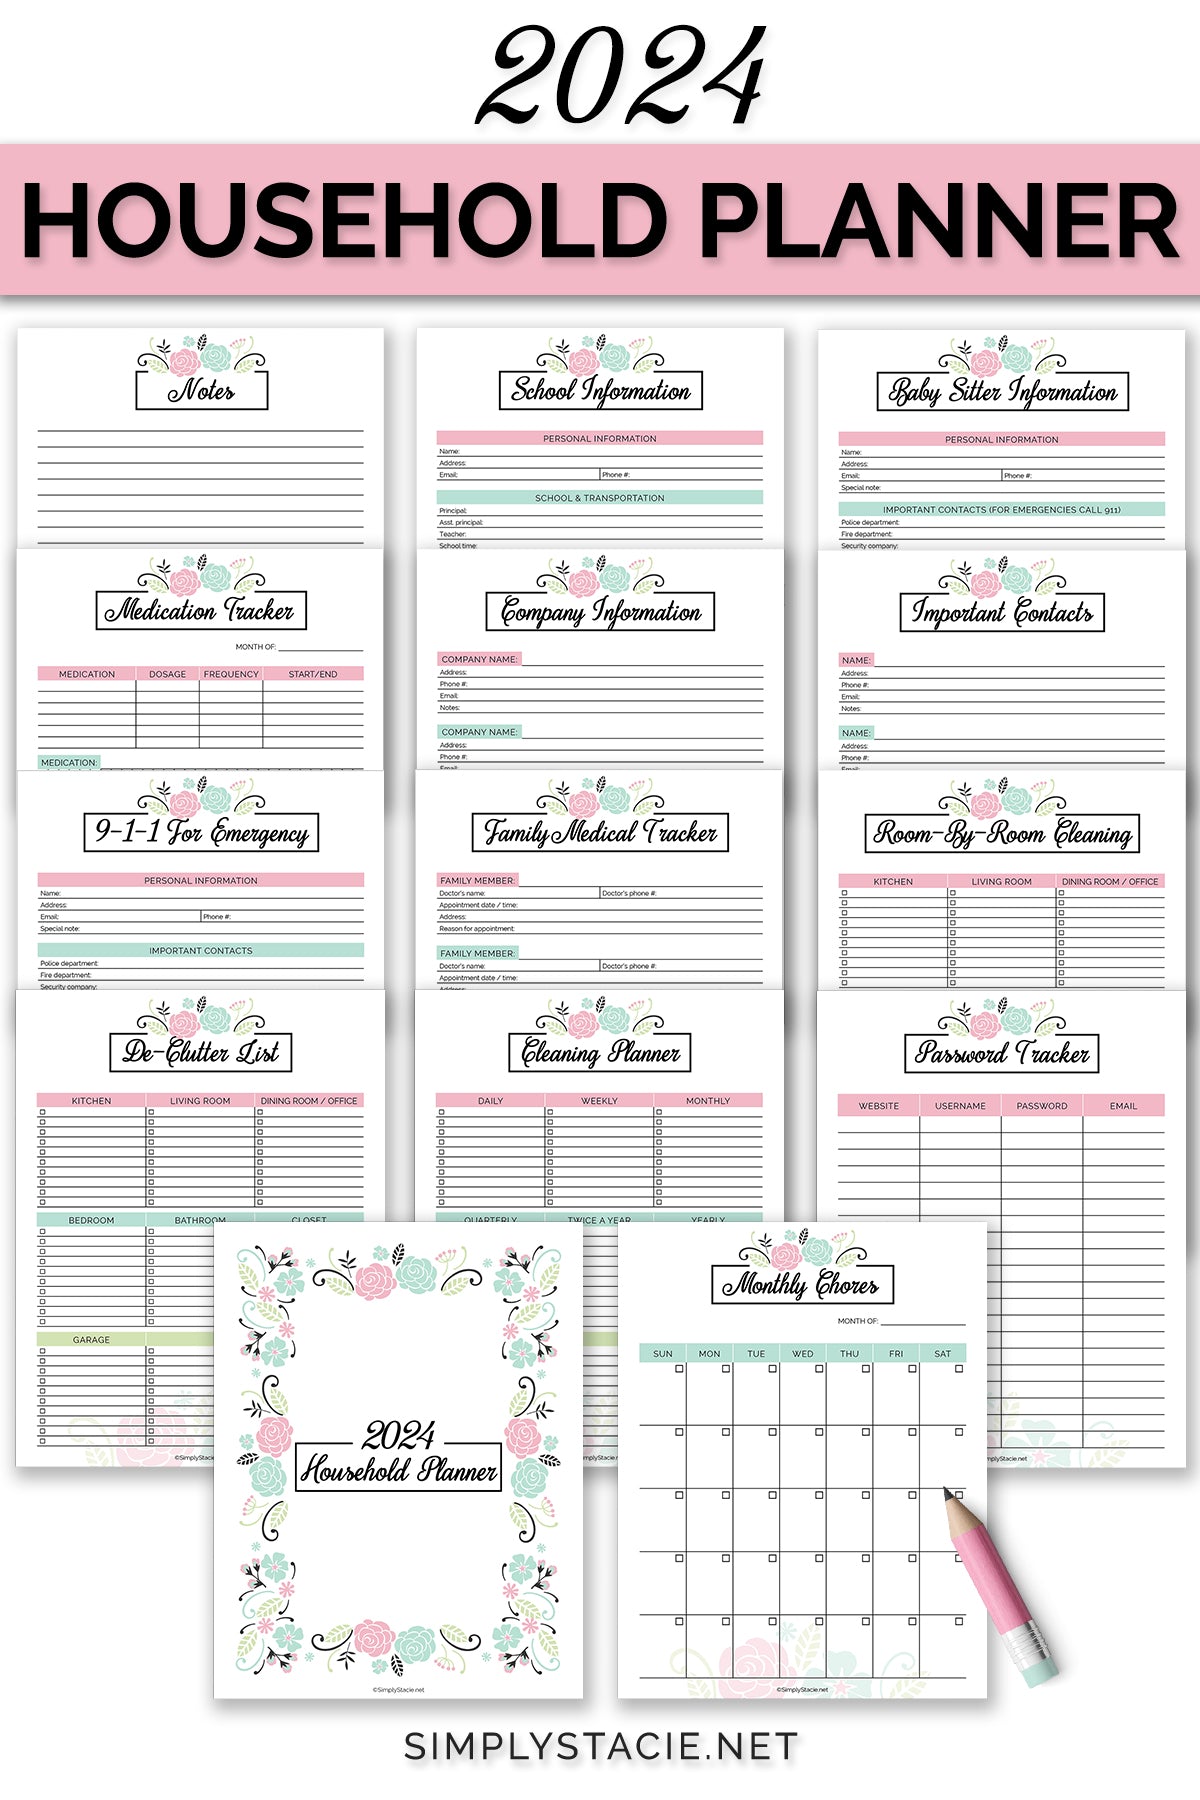 2020 Financial Planner Free Printable - Simply Stacie